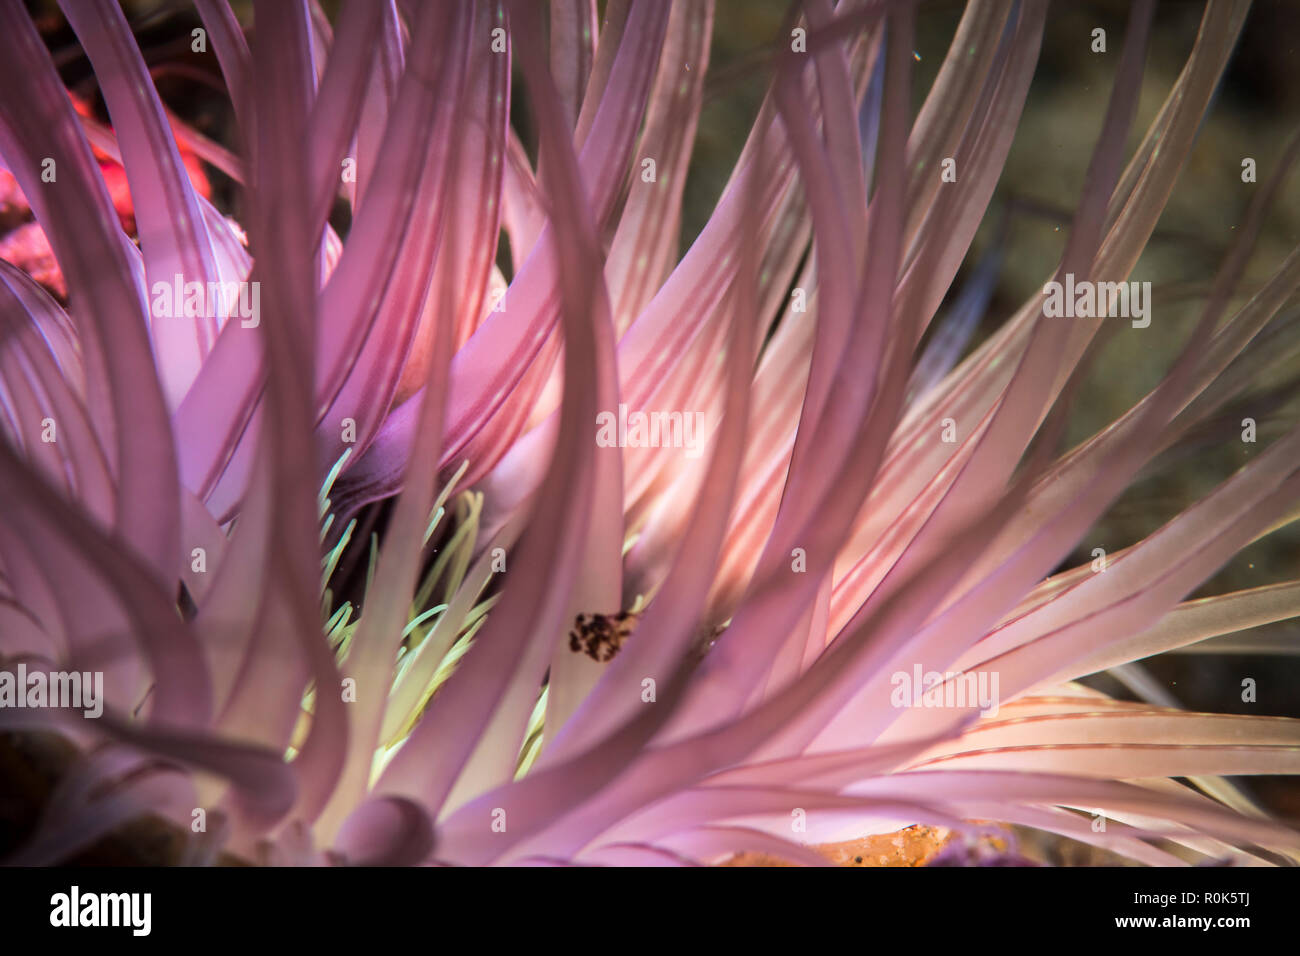 Tube anemone lit with filtered colored light, Anilao, Philippines. Stock Photo